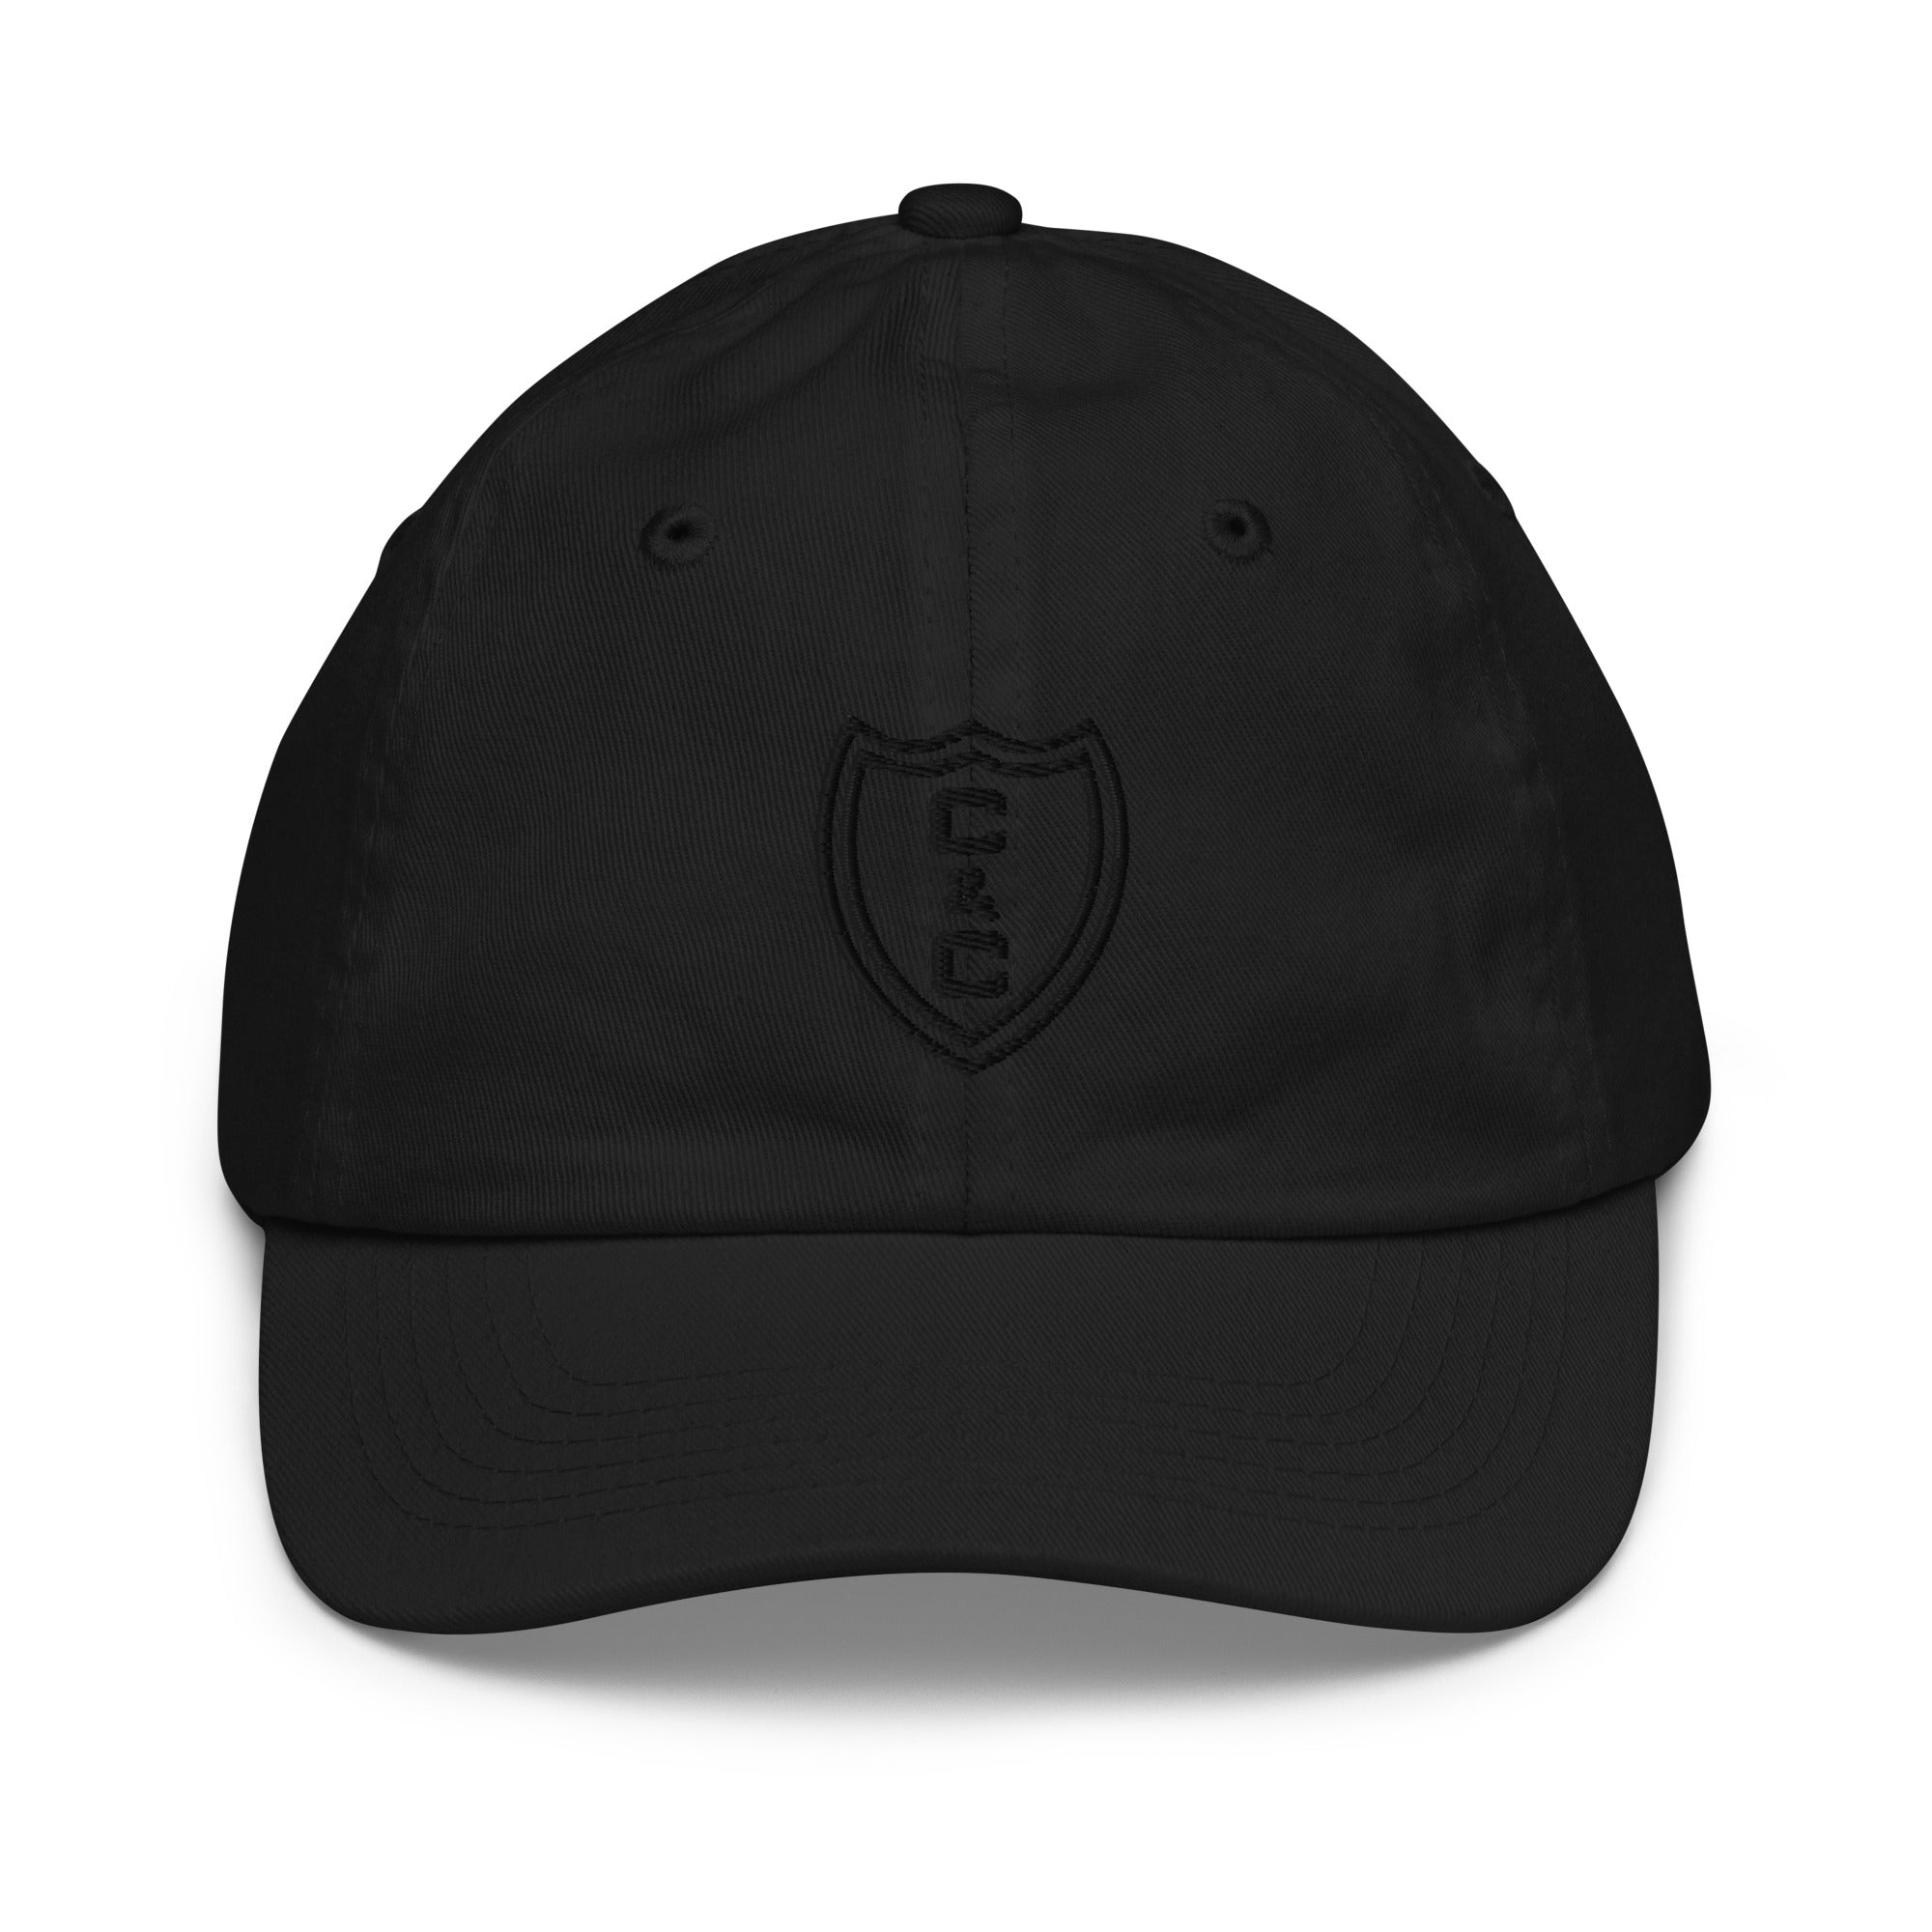 C&C Youth Cap- Black Embroidery (Multiple Color Options)